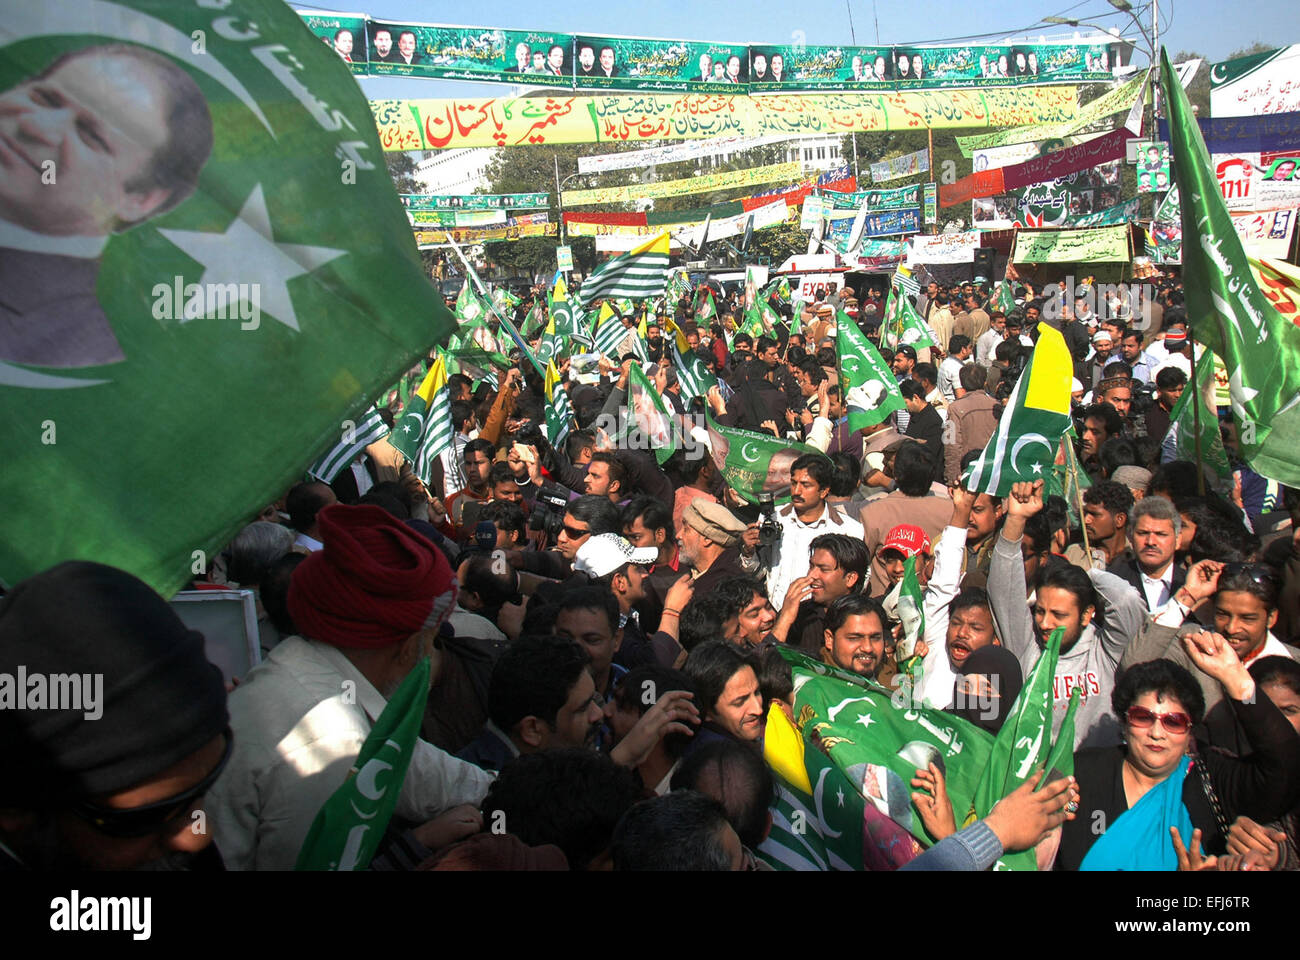 Lahore. 5th Feb, 2015. Demonstrators attend the Kashmir 'Solidarity Day' rally in eastern Pakistan's Lahore, Feb. 5, 2015. Pakistani Prime Minister Nawaz Sharif said on Thursday his country seeks 'meaningful and result oriented dialogue' with India for the resolution of outstanding issues. 'However the agenda of Pakistan-India dialogue will remain inconclusive without inclusion of Kashmir dispute,' he told legislators in Muzaffarabad, the capital of Pakistan-administered Kashmir. © Sajjad/Xinhua/Alamy Live News Stock Photo